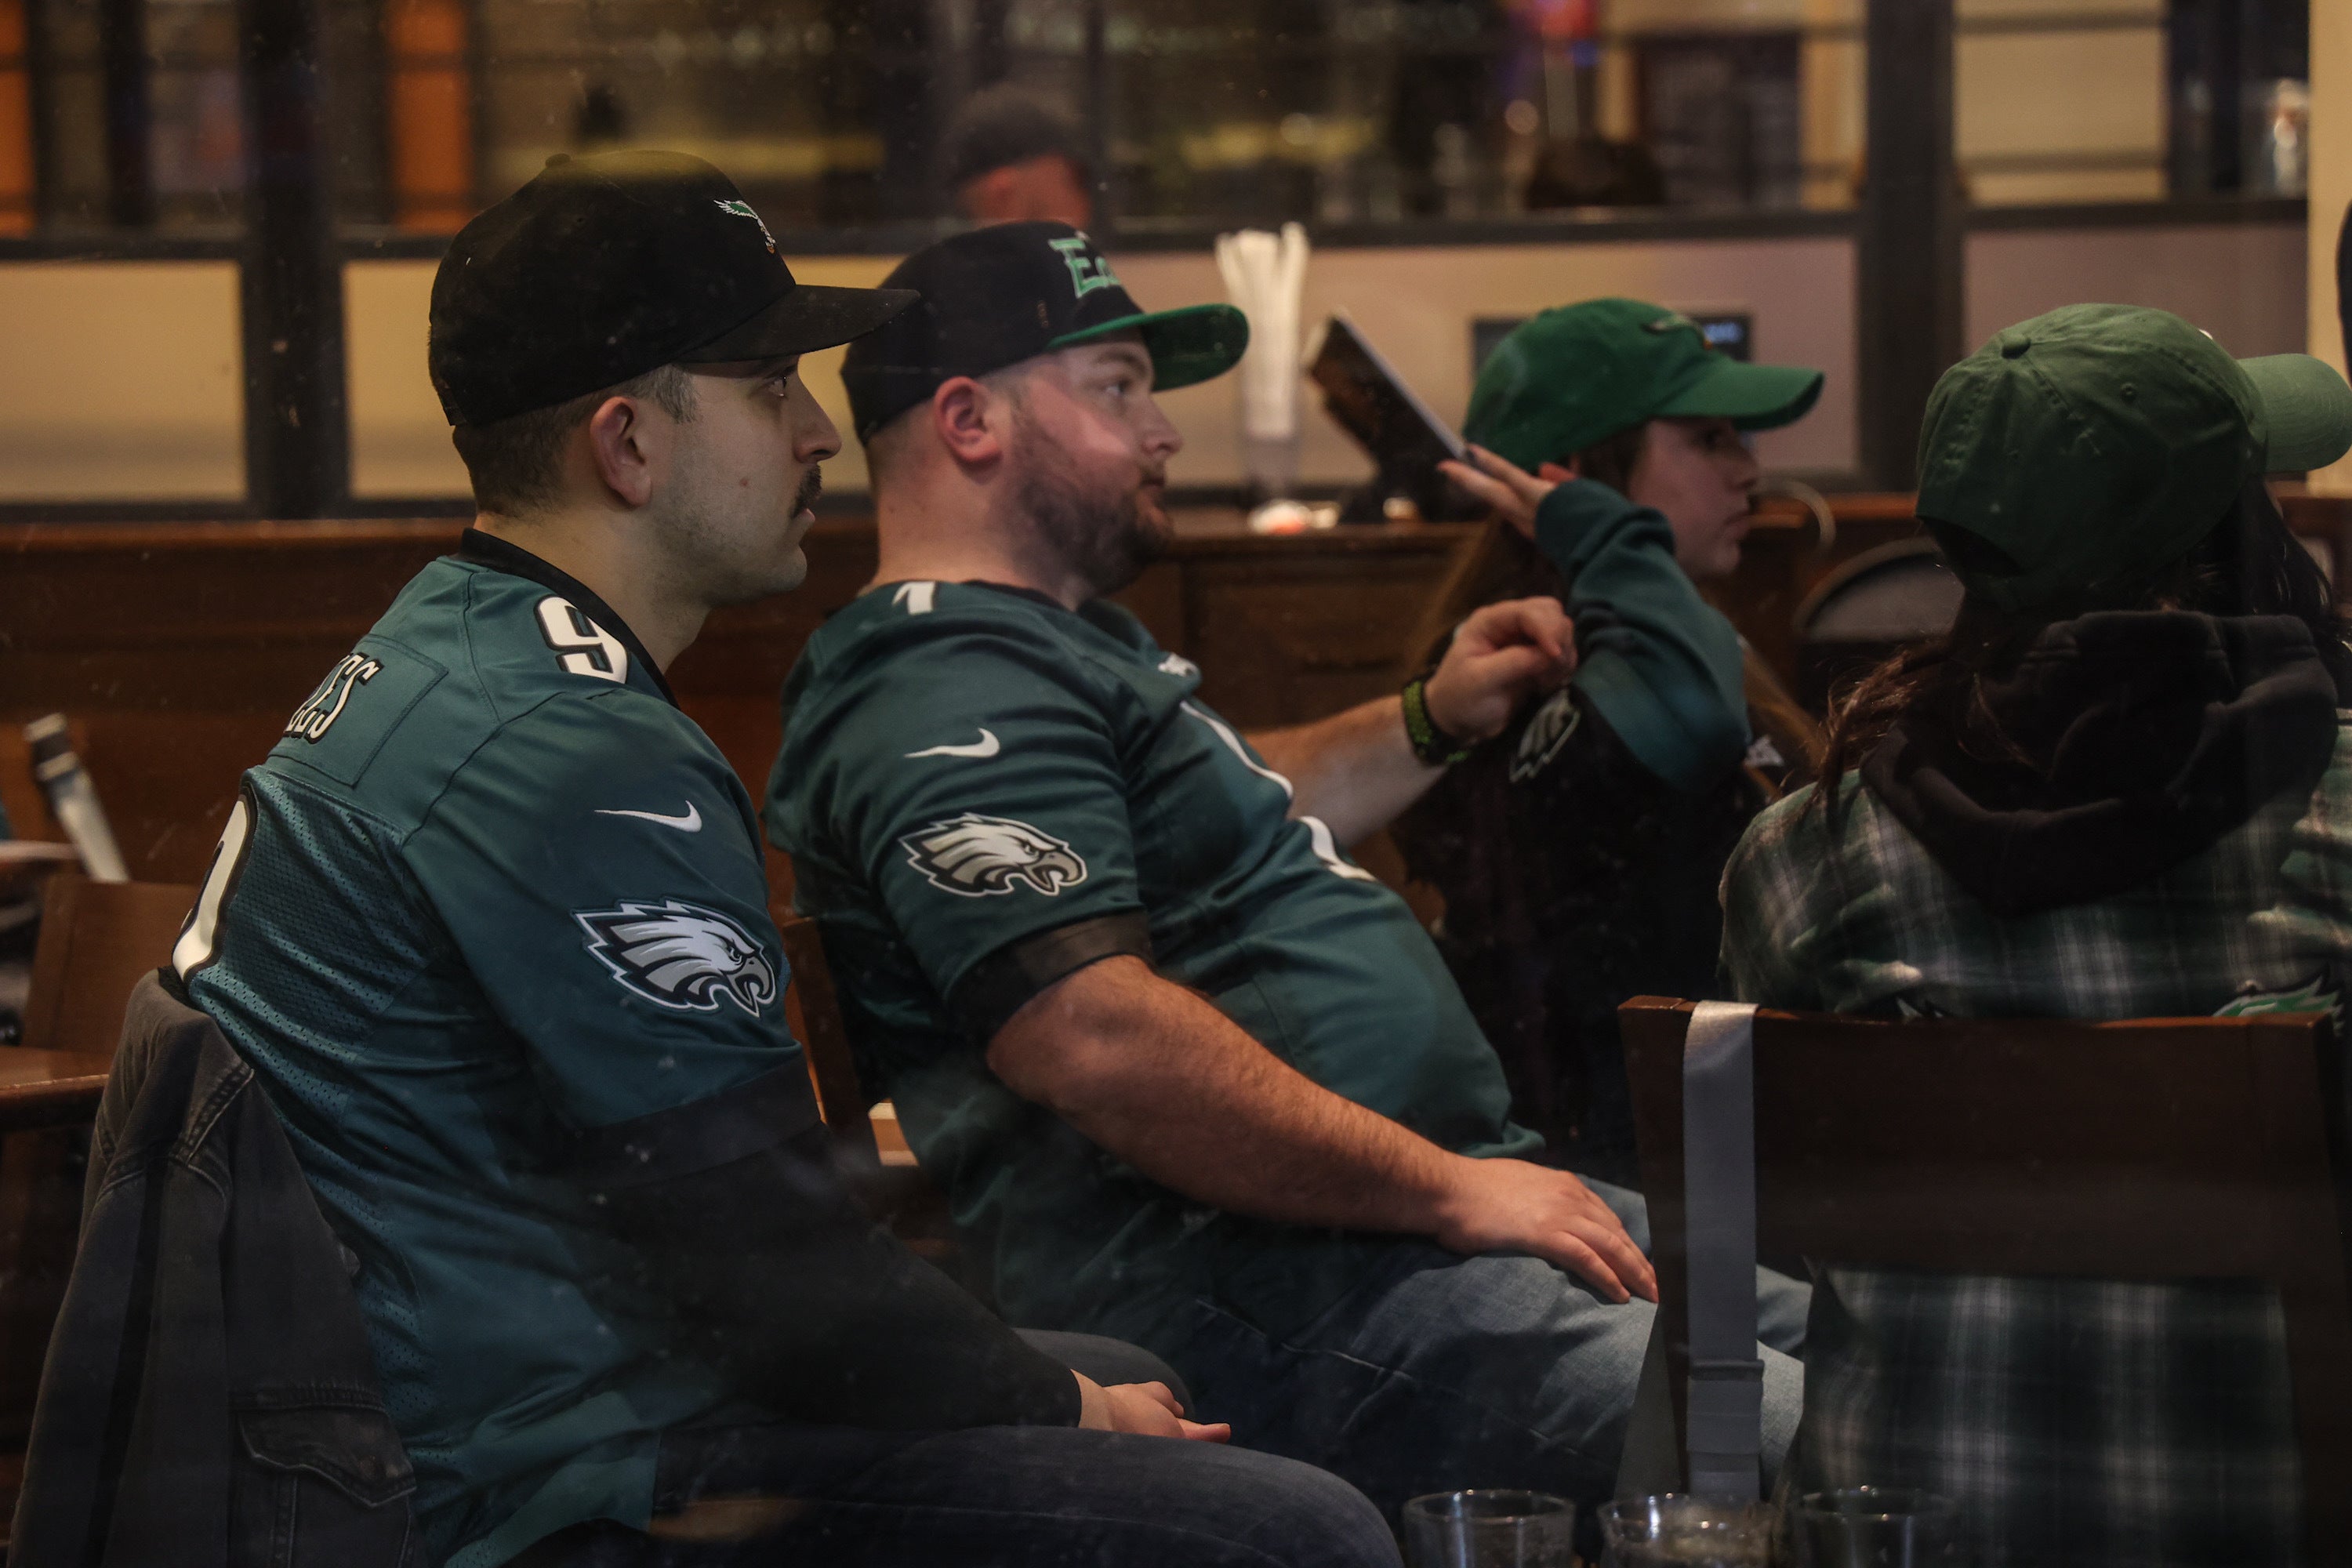 Eagles fans head home disappointed after tough Super Bowl loss - WHYY